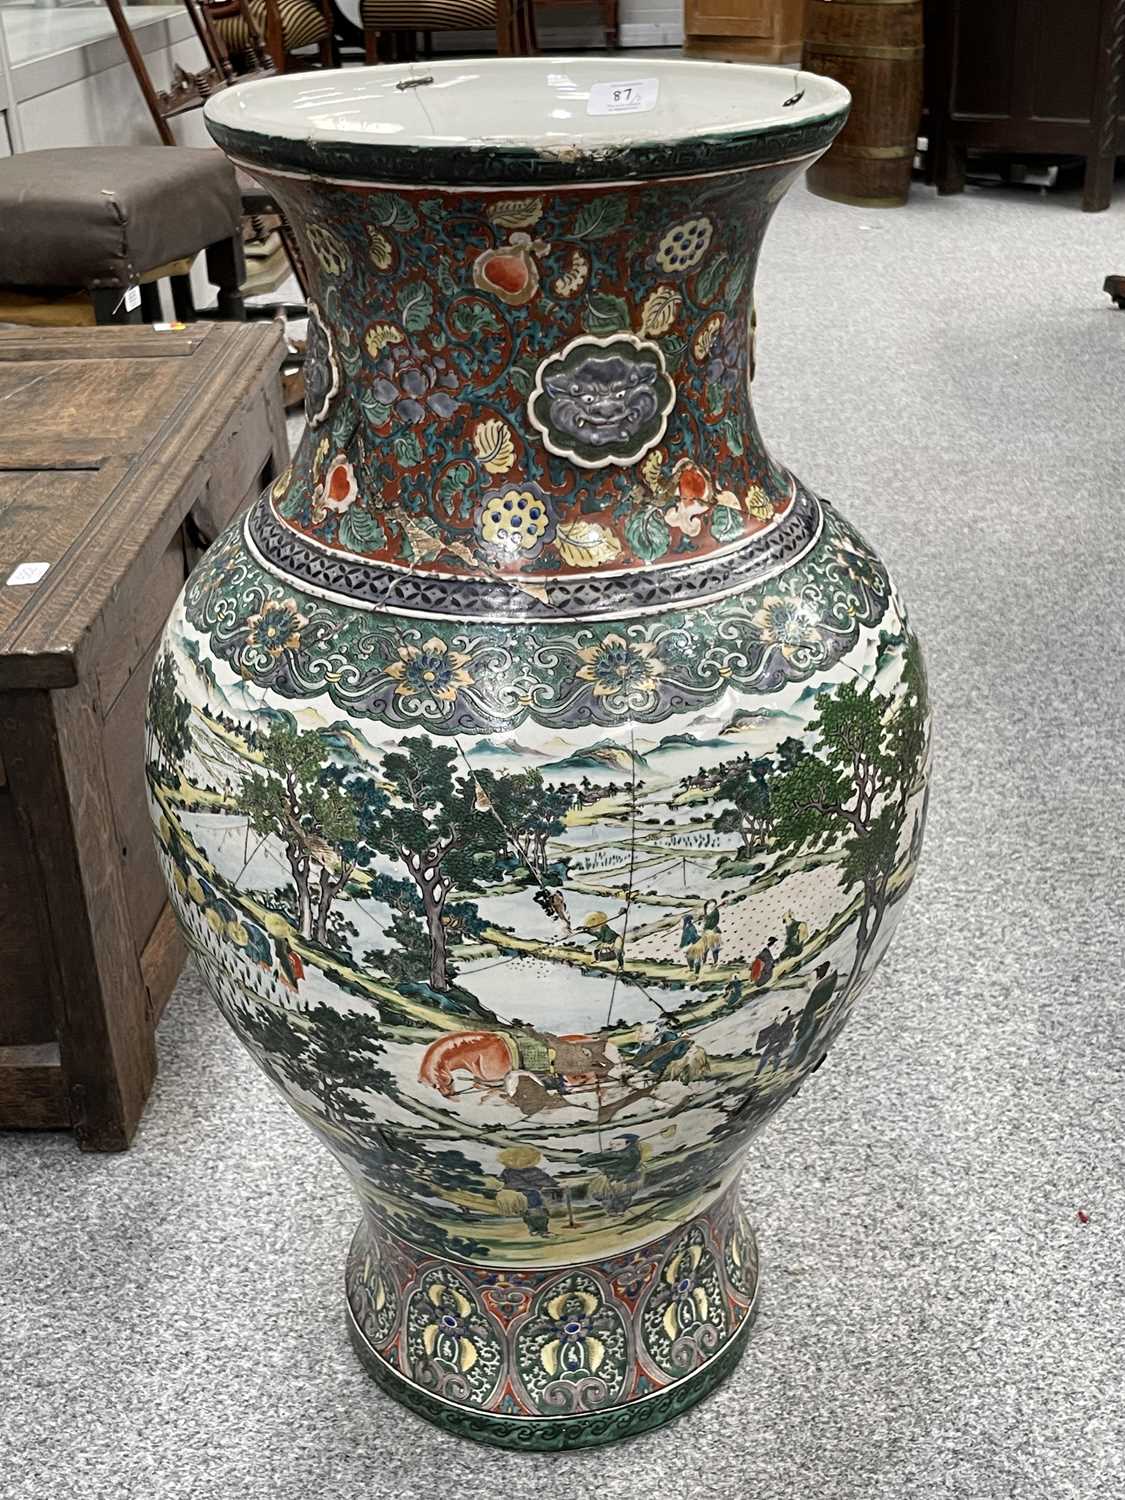 A PAIR OF LARGE CHINESE PORCELAIN VASES, 19TH CENTURY - Image 21 of 23